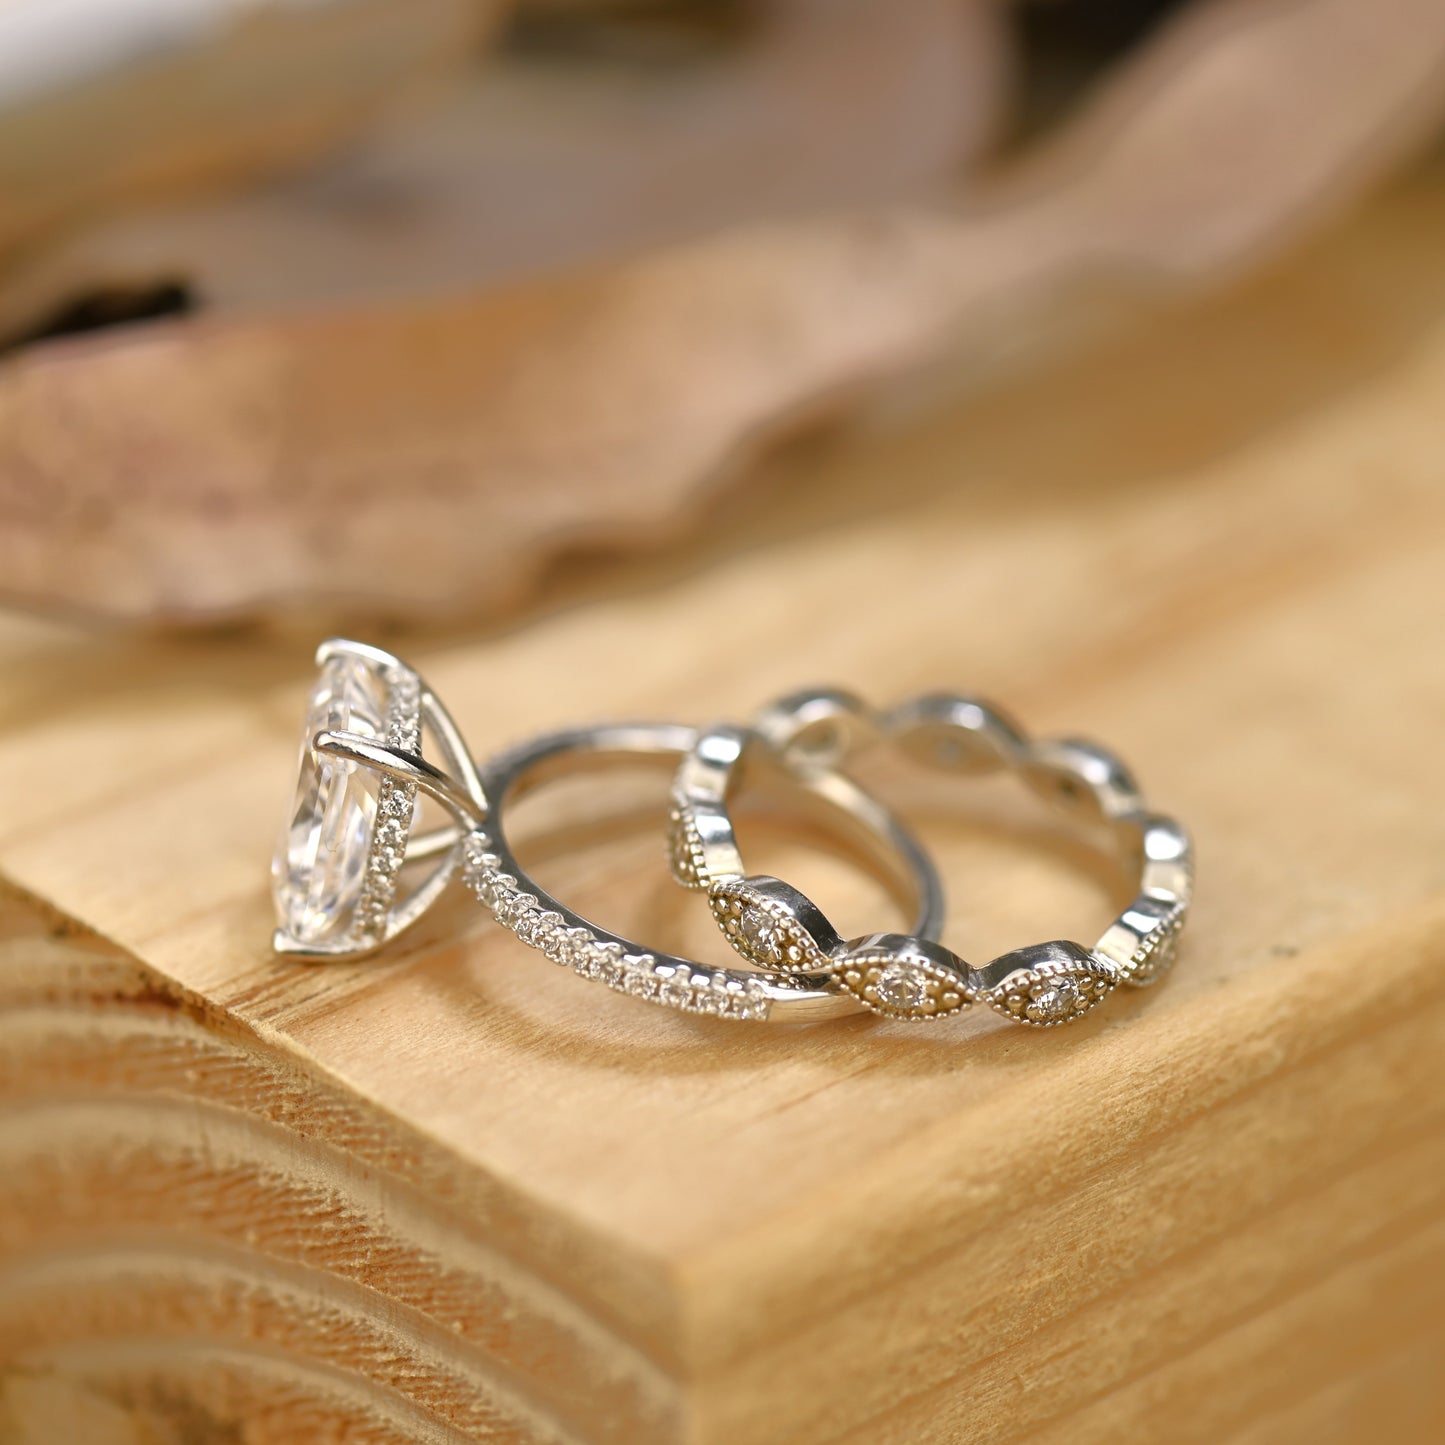 2.5CT Accents Anniversary Ring Set